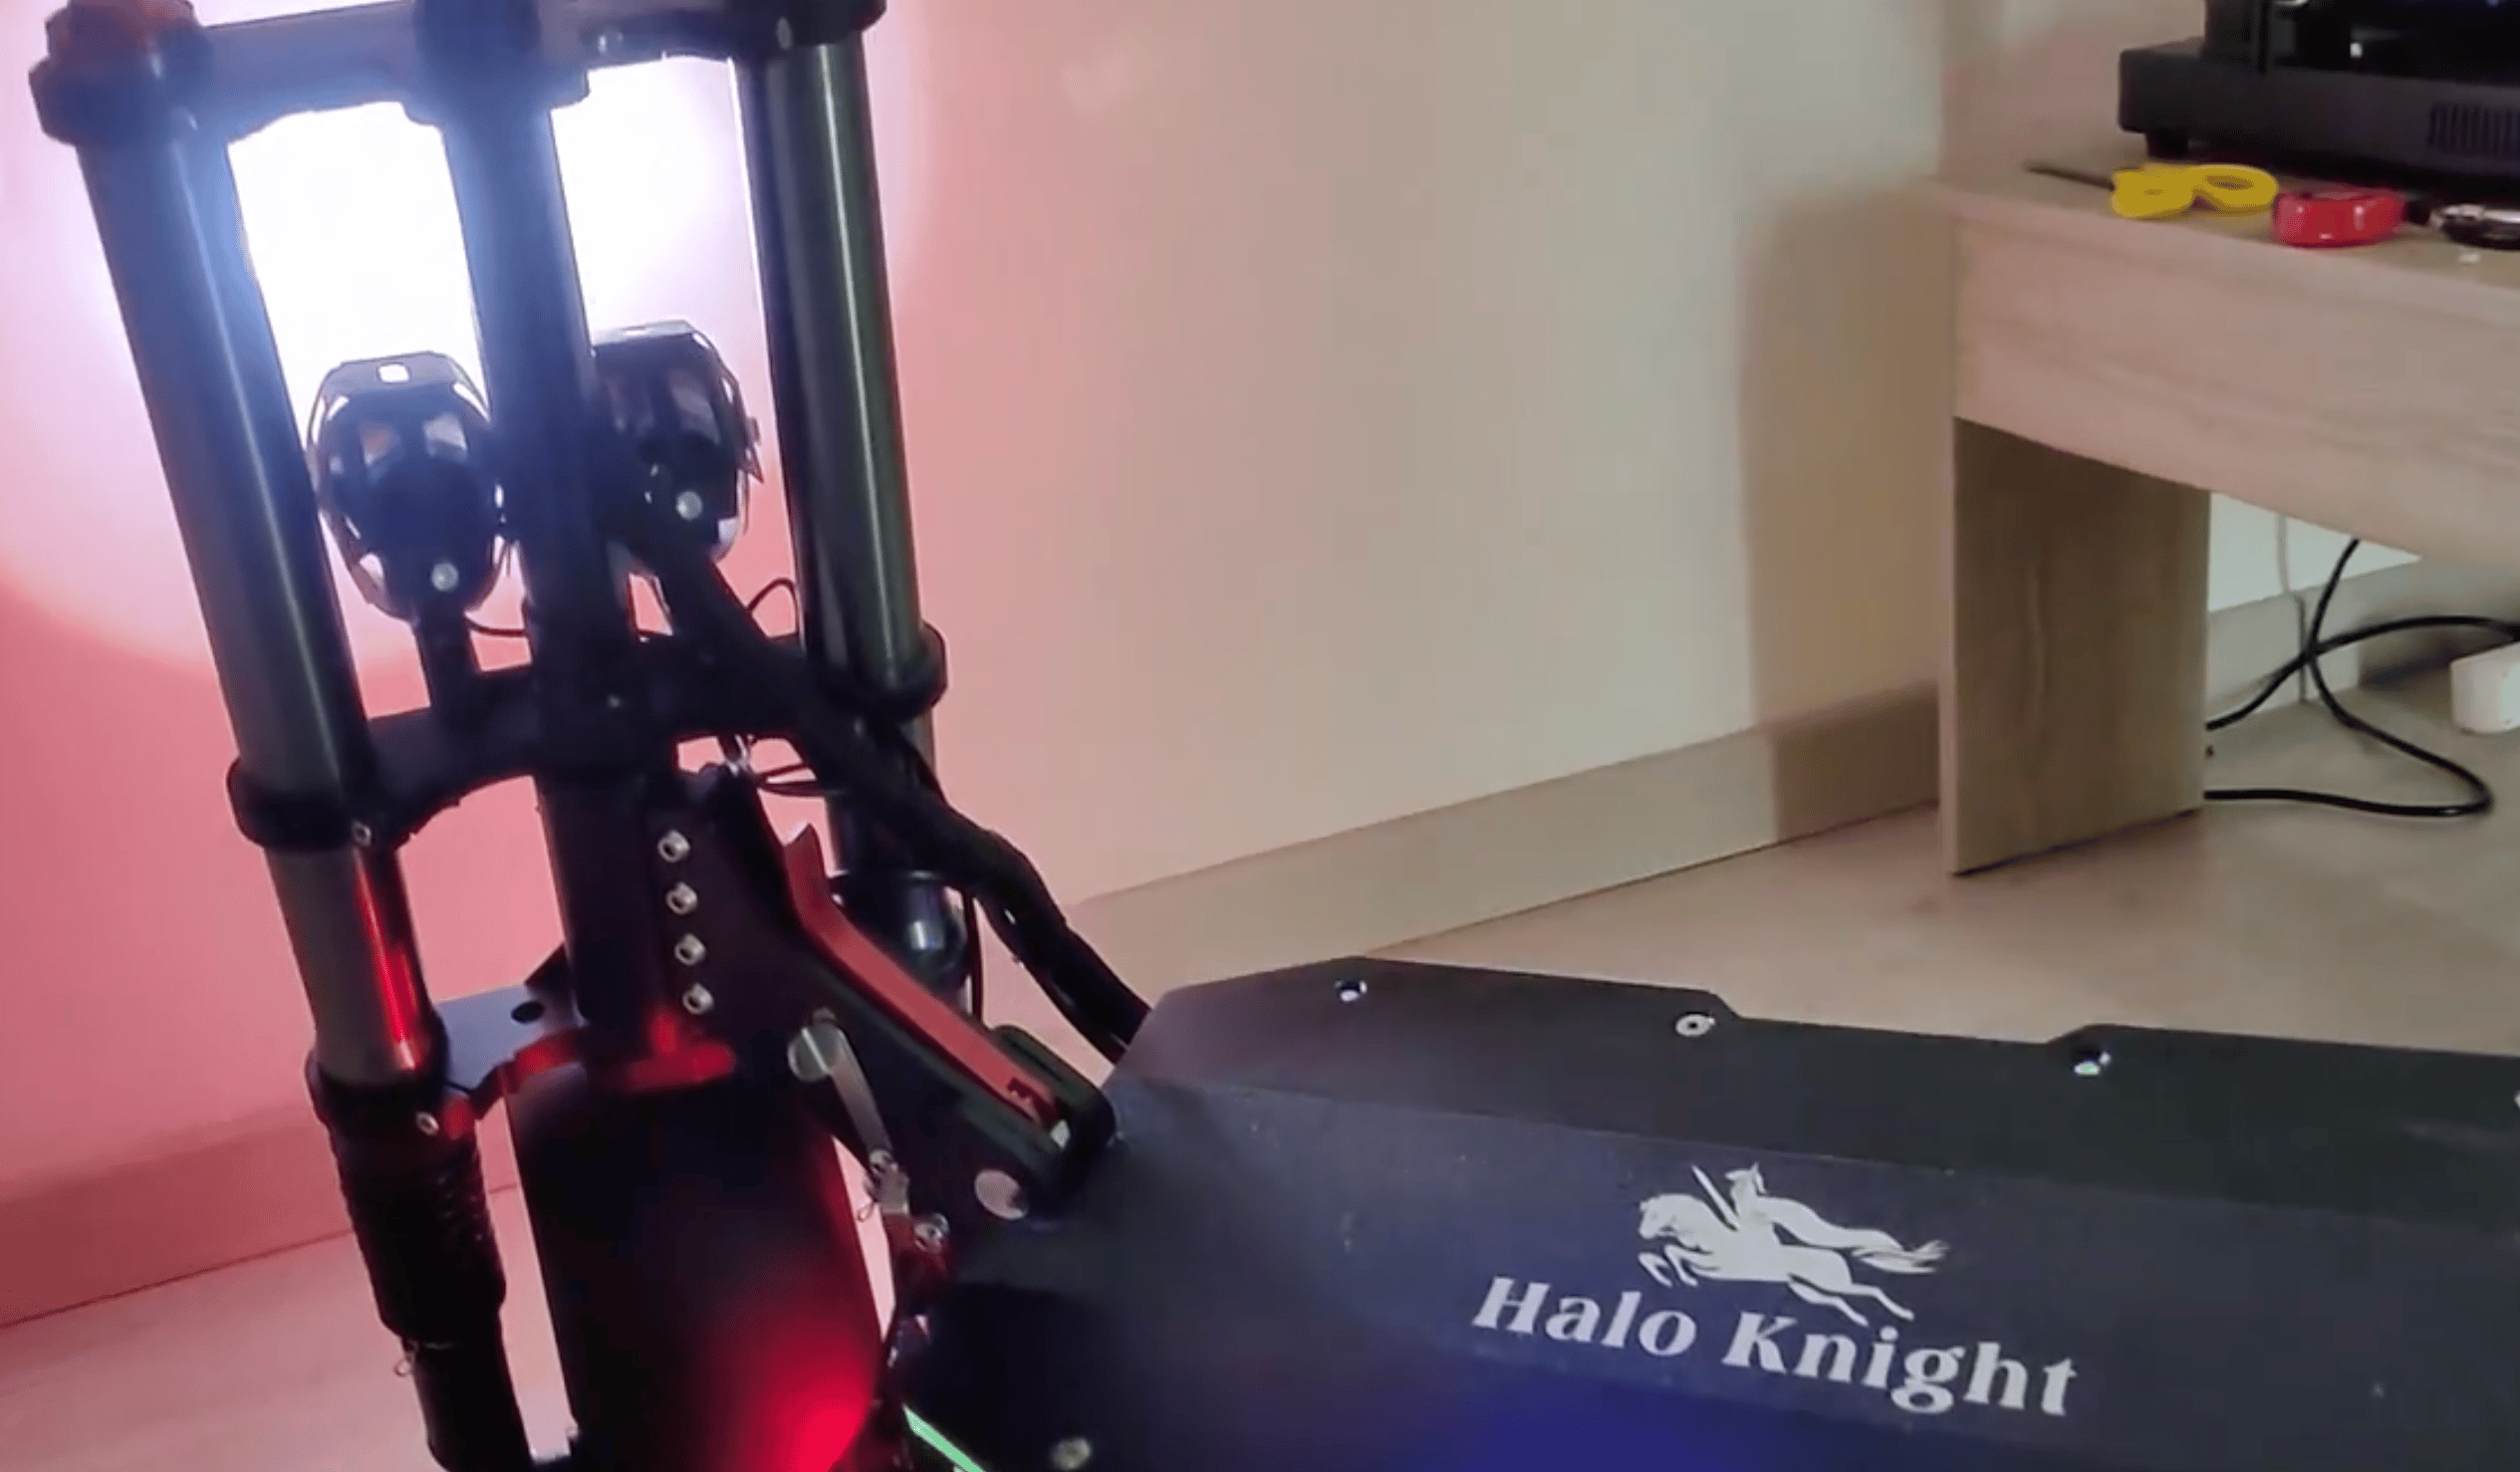 Halo Knight T107 Pro folding electric scooter